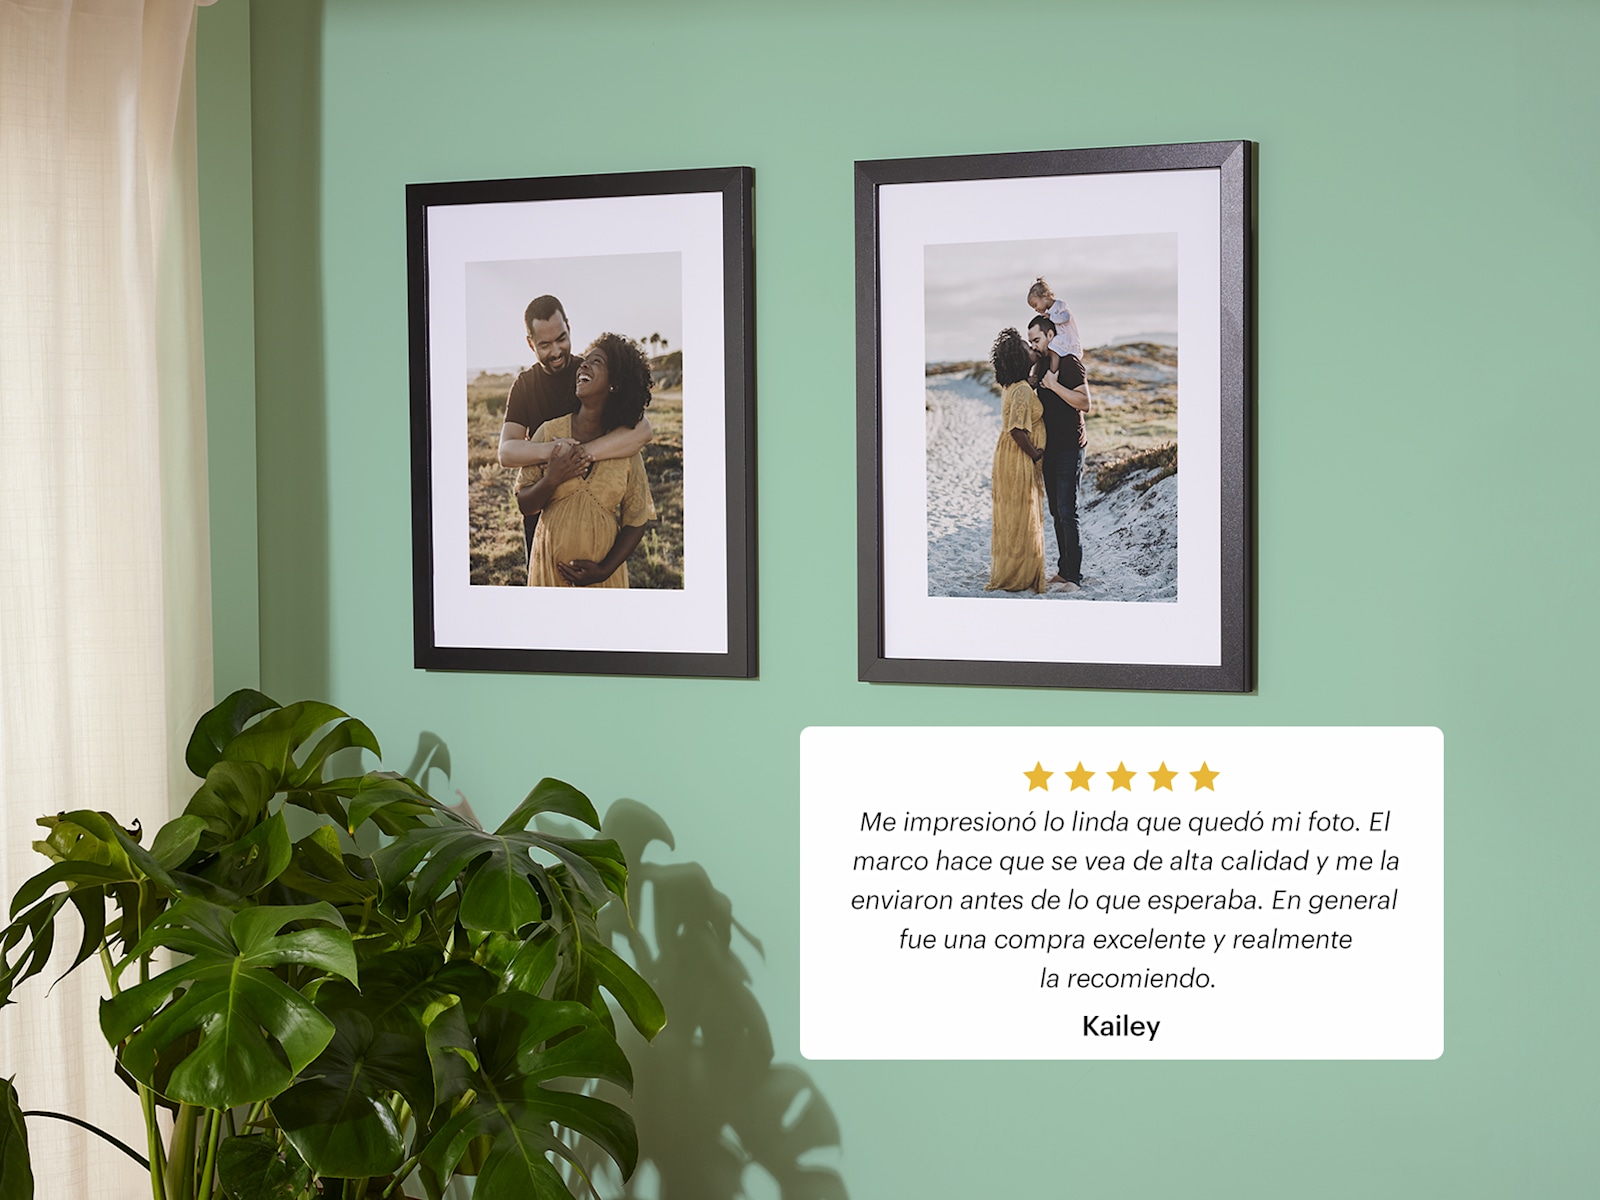 Larger version: Two framed photo prints hang on a green wall.